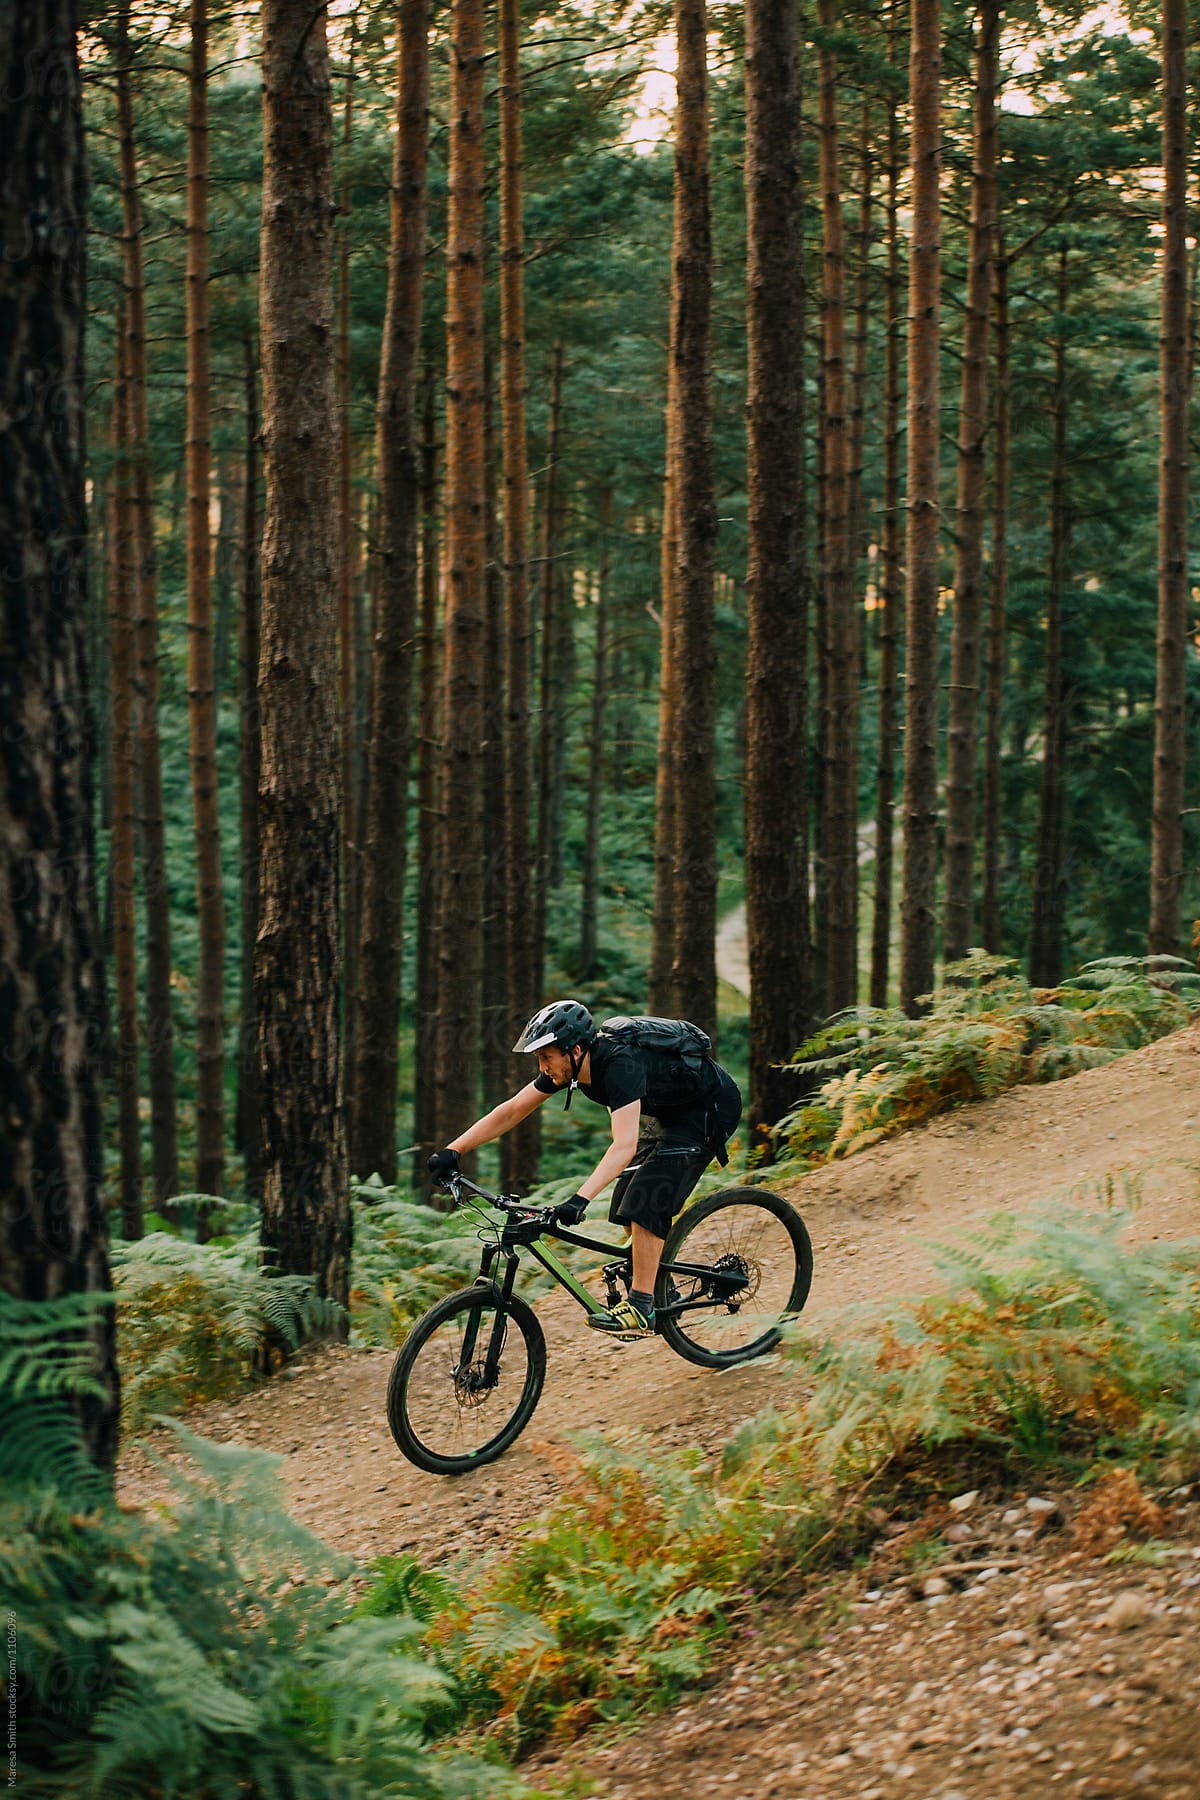 A man cycling fast down a sandy slope in a forest